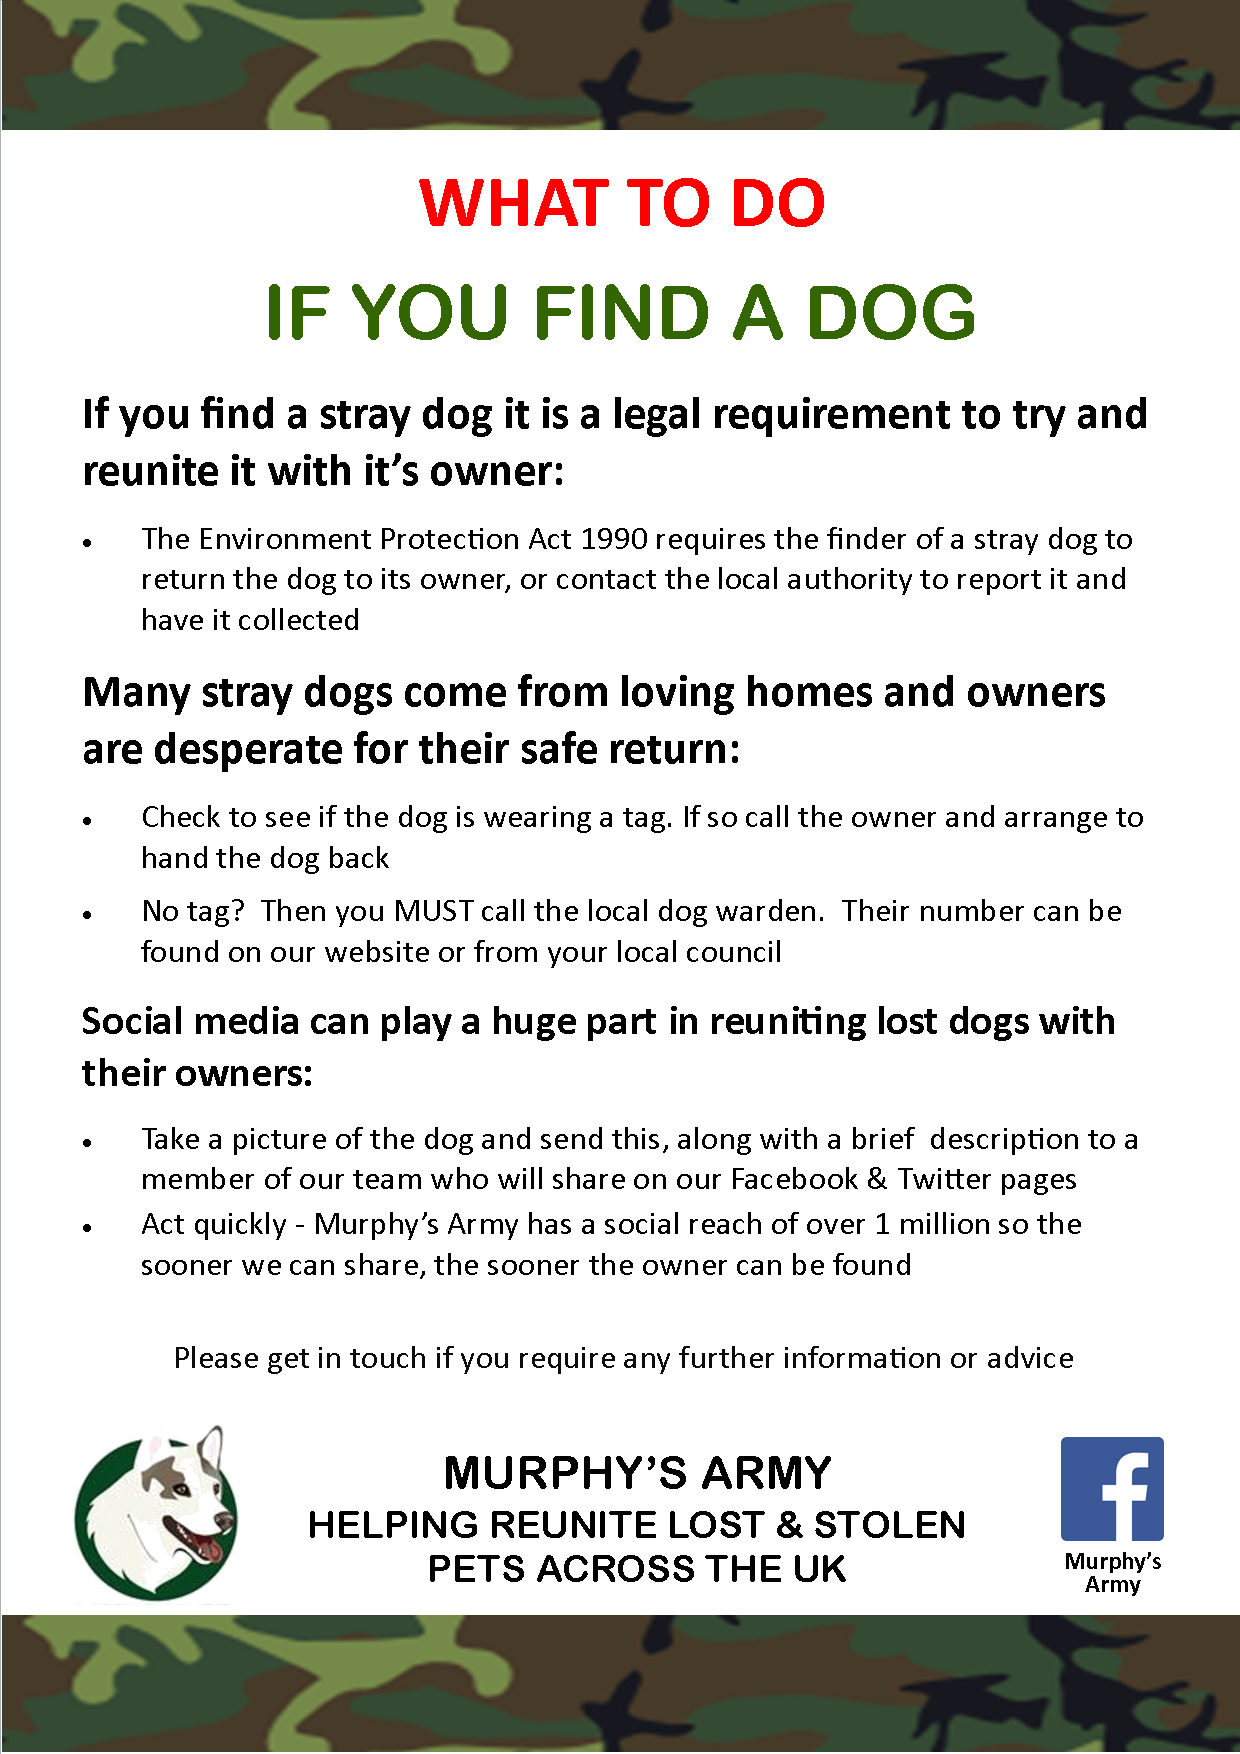 if you find a stray dog